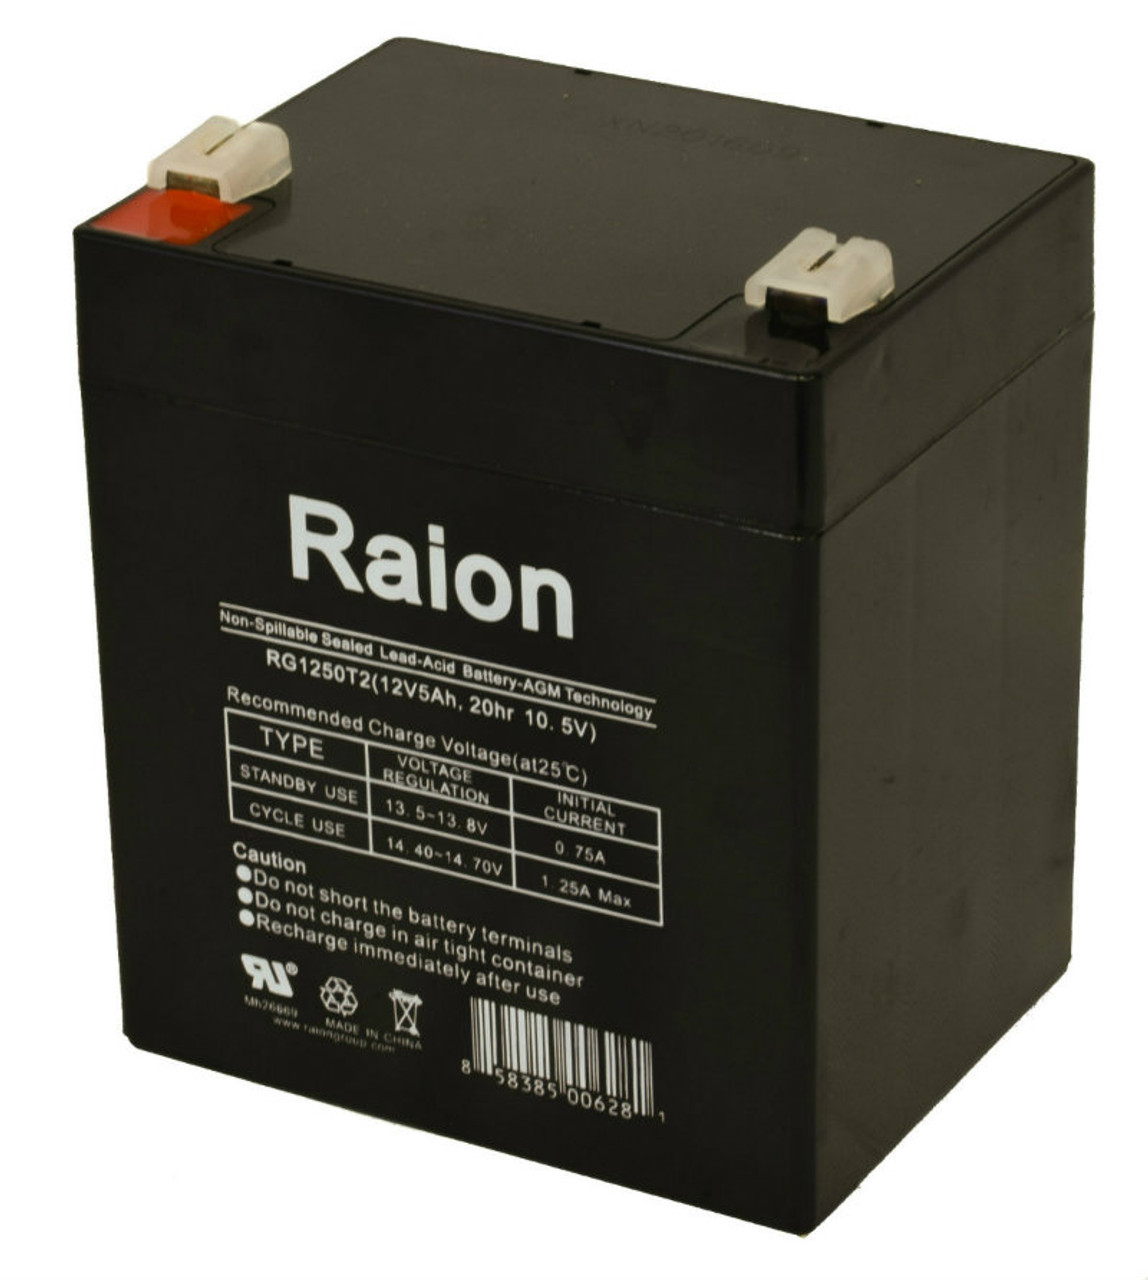 Raion Power 12V 5Ah Replacement Fire Alarm Control Panel Battery for Digital Security BD 712